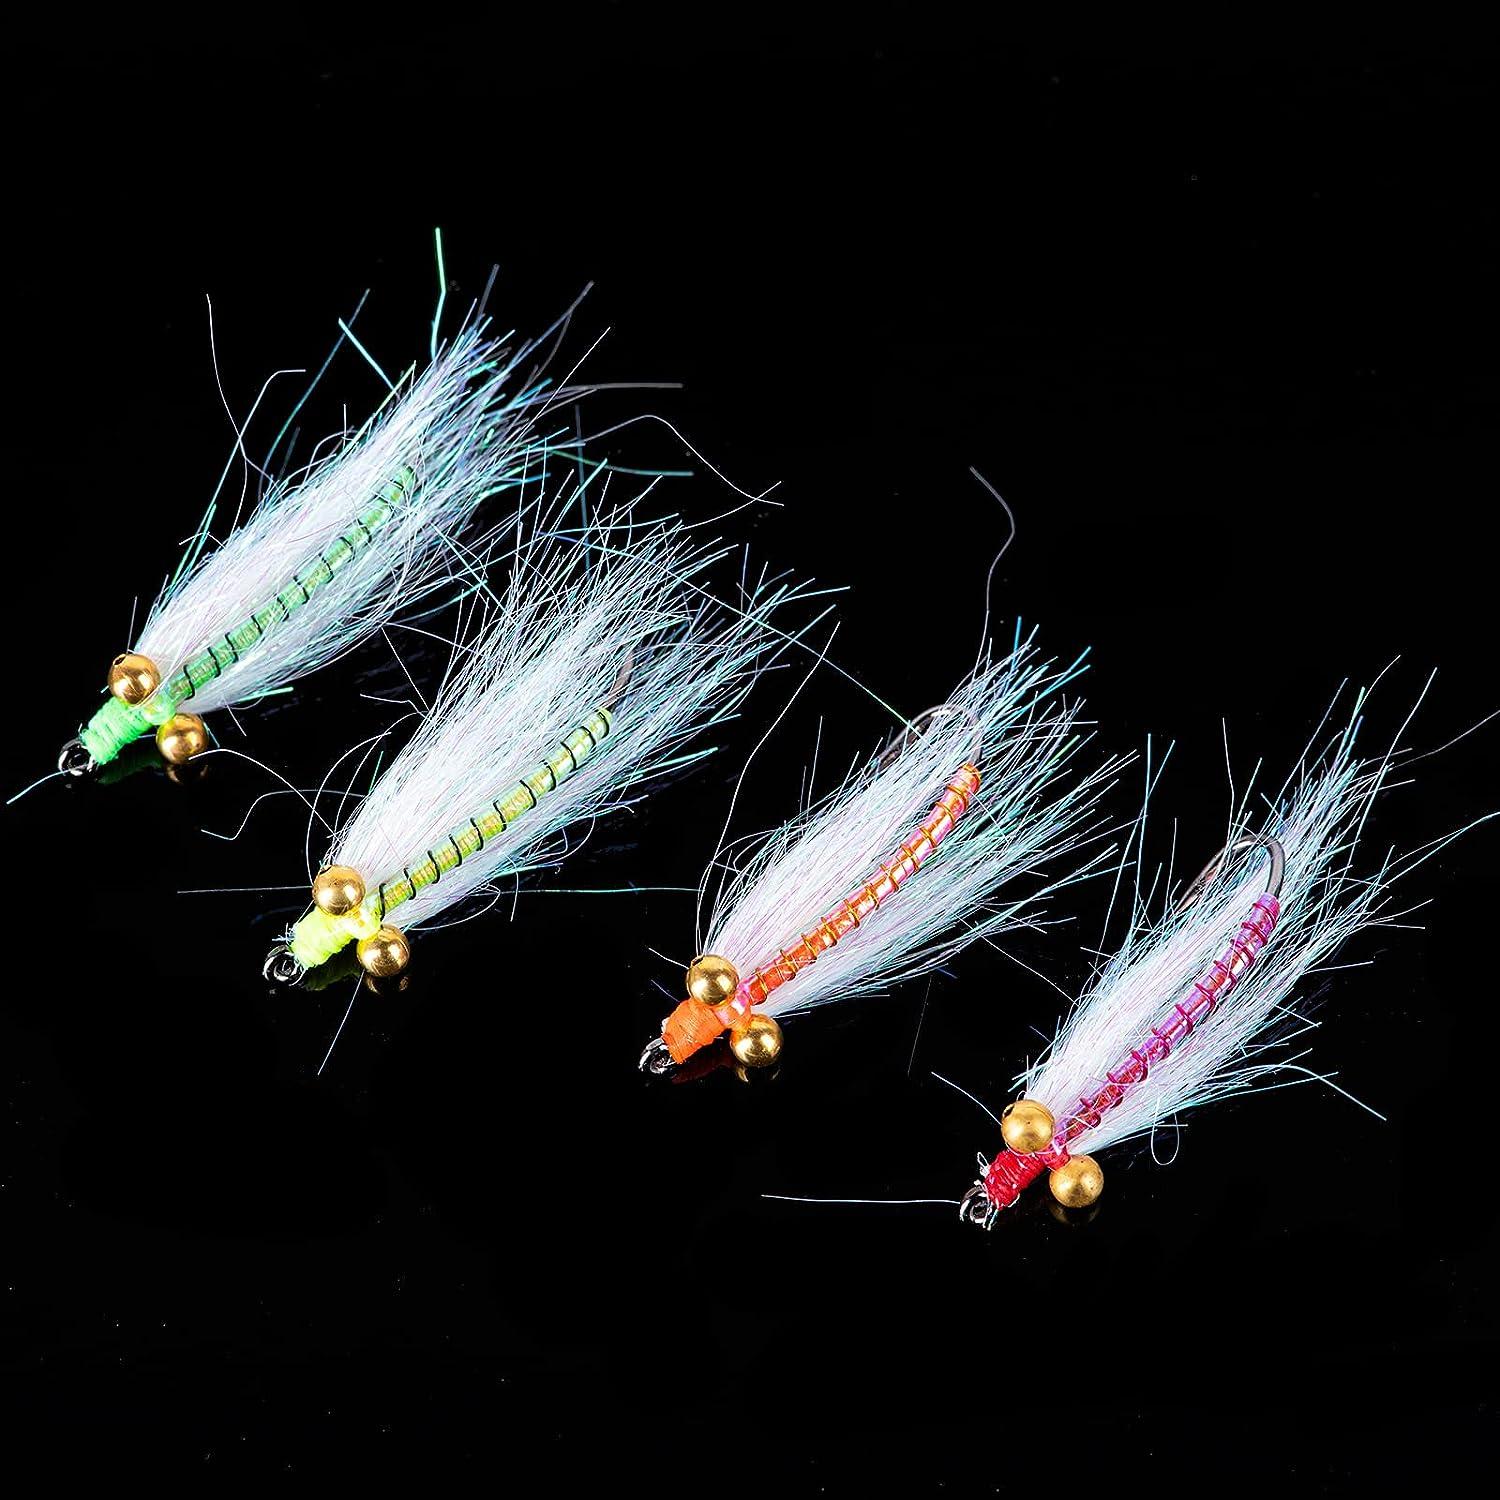 Goture Fly Fishing Flies Trout Flies Fly Fishing Lure Nymph Streamer Minnow  Shrimp Flies for Fly Fishing Style 11-4pcs 12#hook